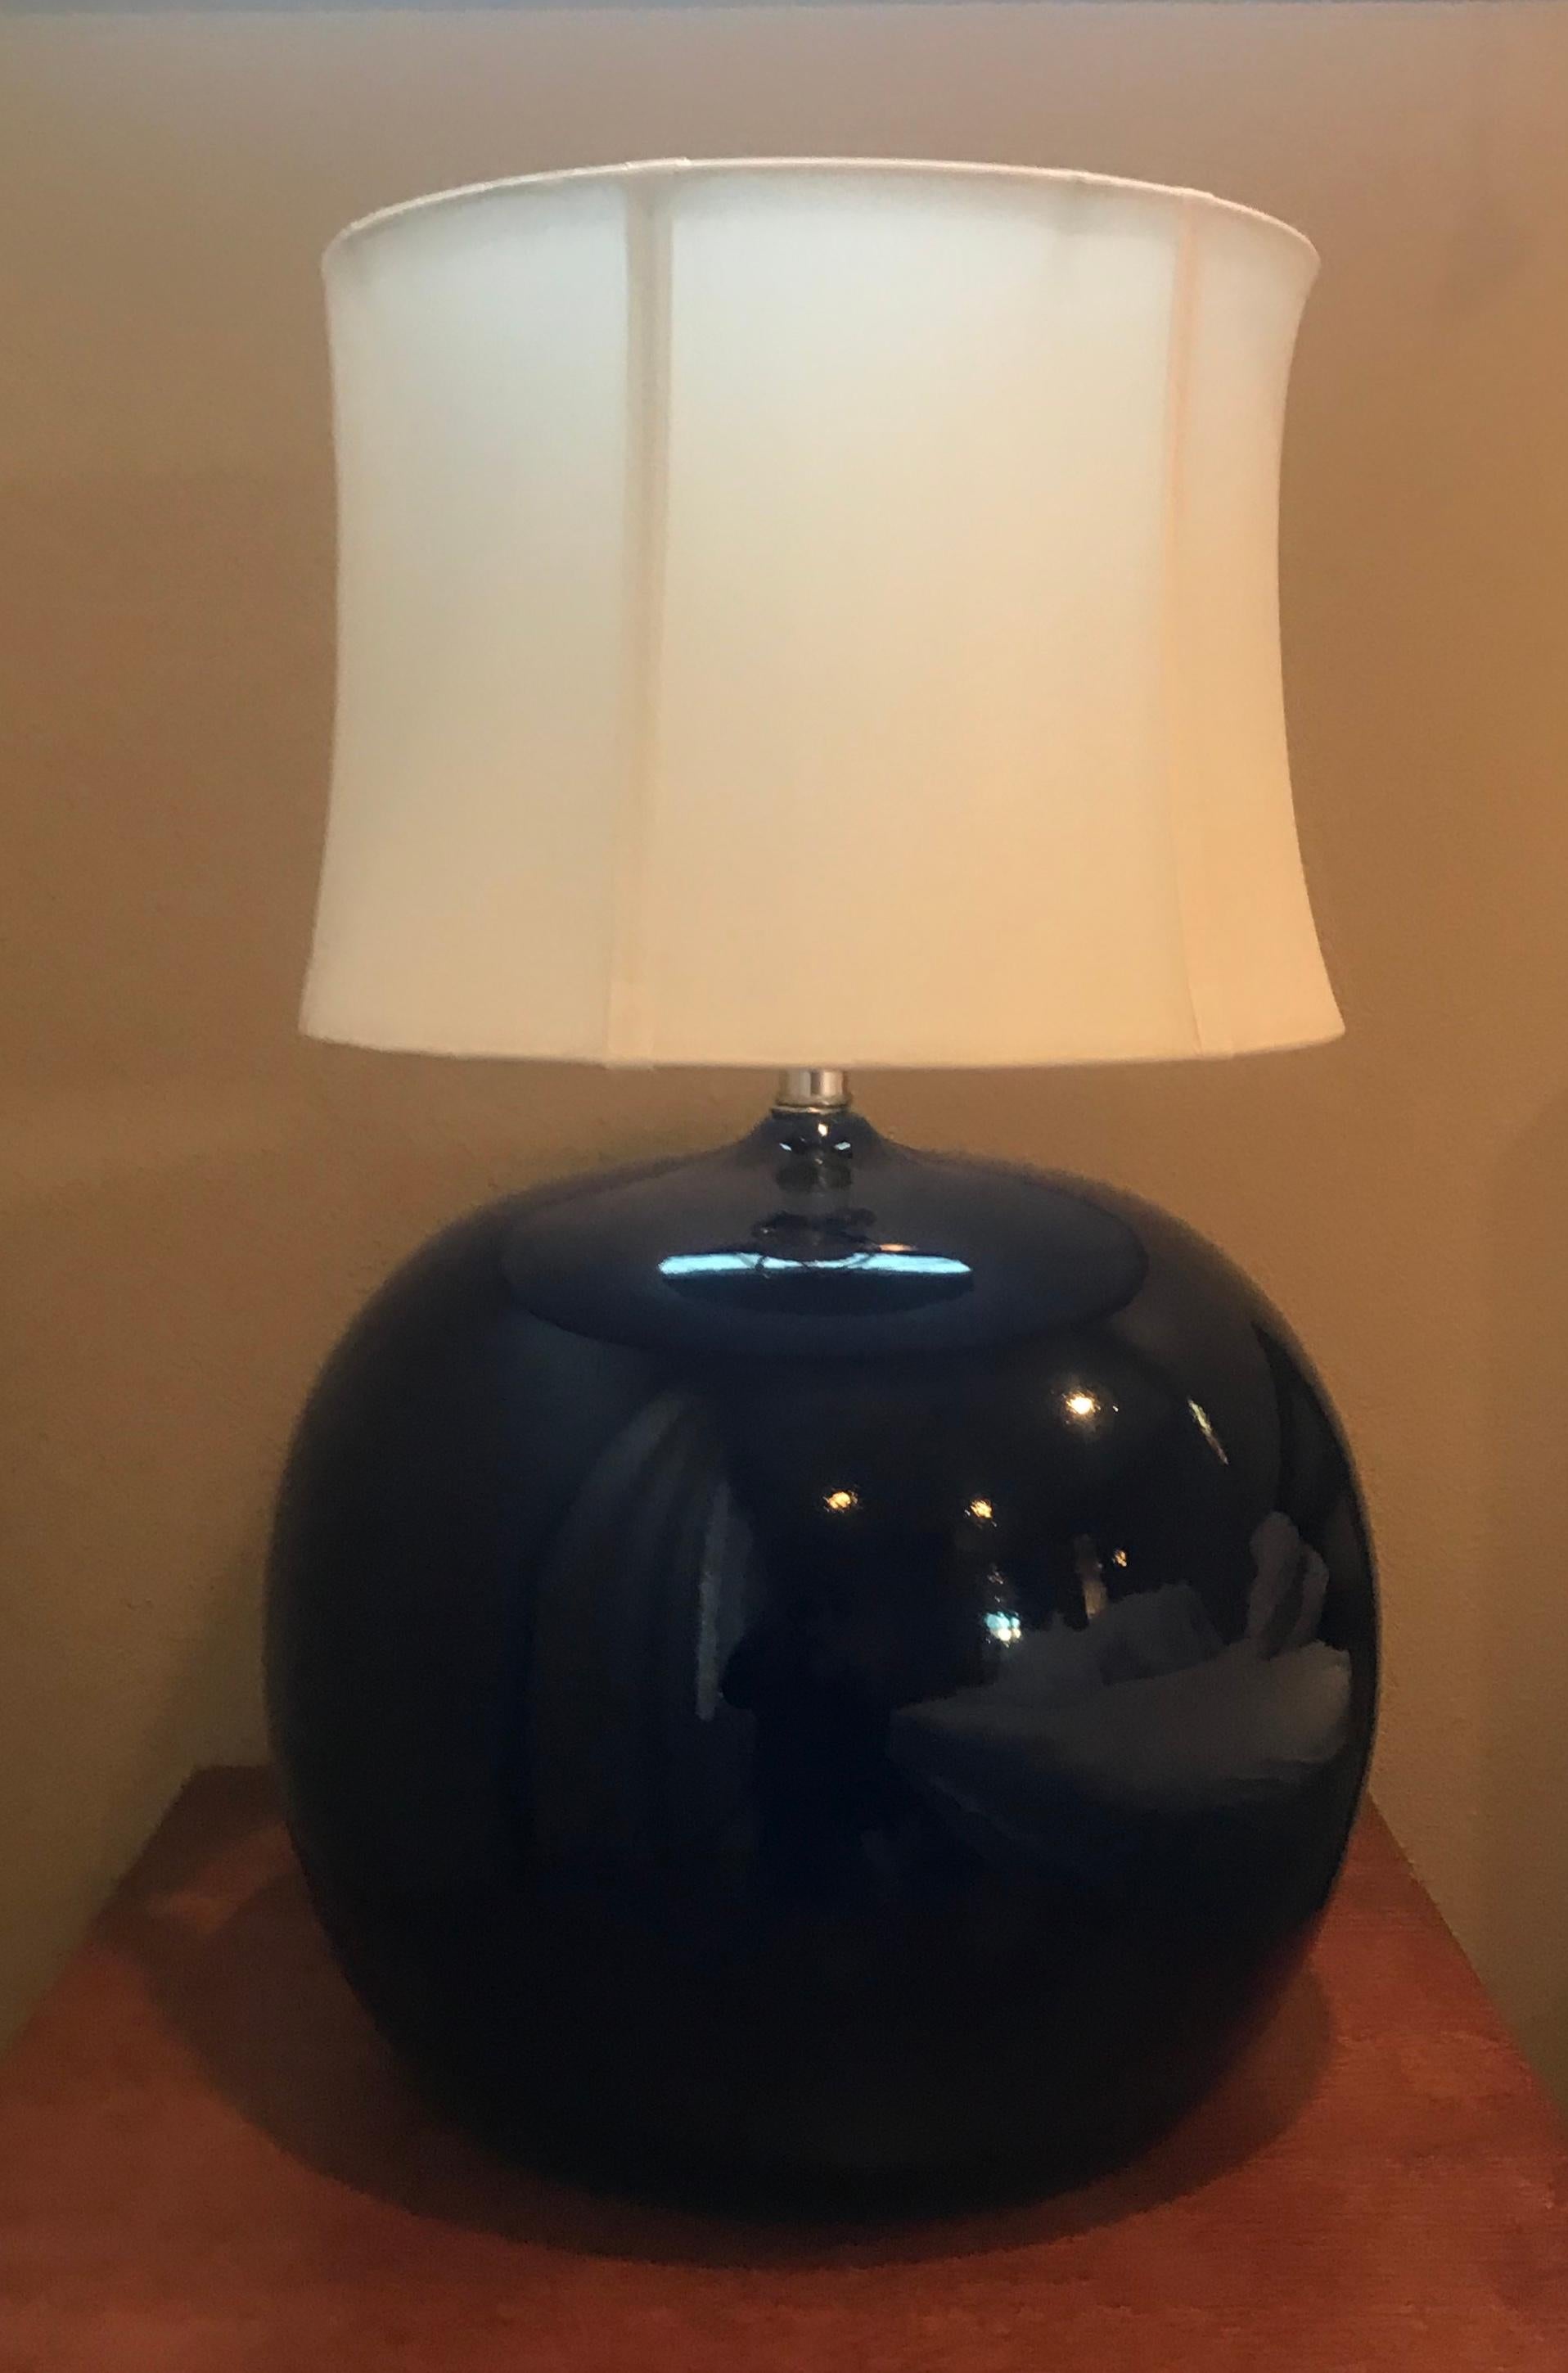 An orb shaped pair of ceramic 1970s Portuguese table lamps in a dark cobalt blue with chrome hardware. Rewired.